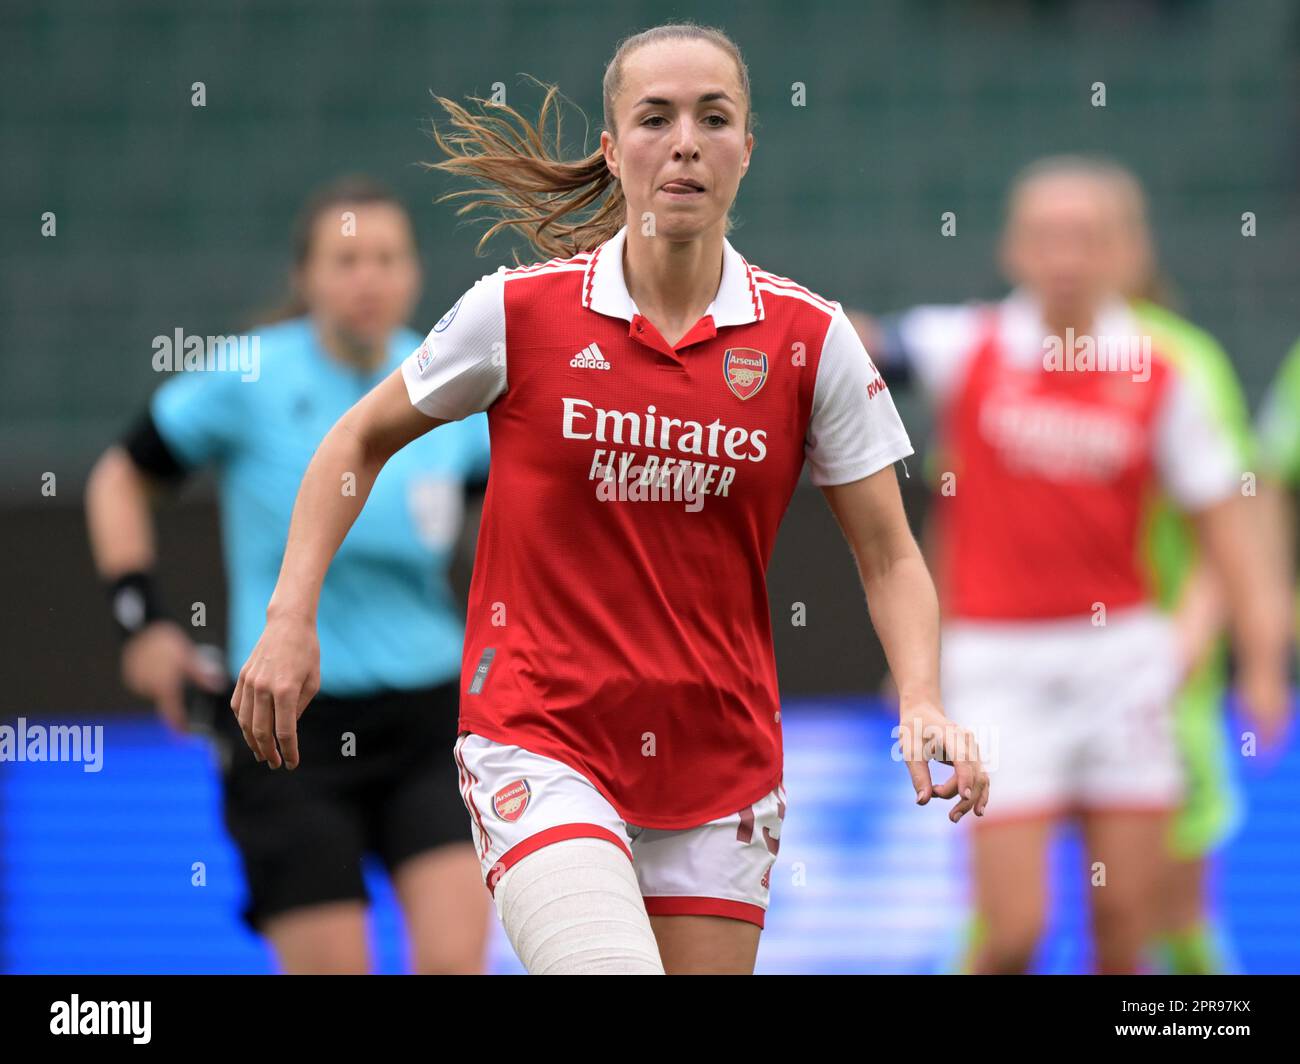 WOLFSBURG - Lia Walti of Arsenal WFC during the UEFA Champions League Women's Semifinal match between VFL Wolfsburg and Arsenal WFC at VFL Wolfsburg Arena on April 23, 2023 in Wolfsburg, Germany. AP | Dutch Height | GERRIT OF COLOGNE Stock Photo